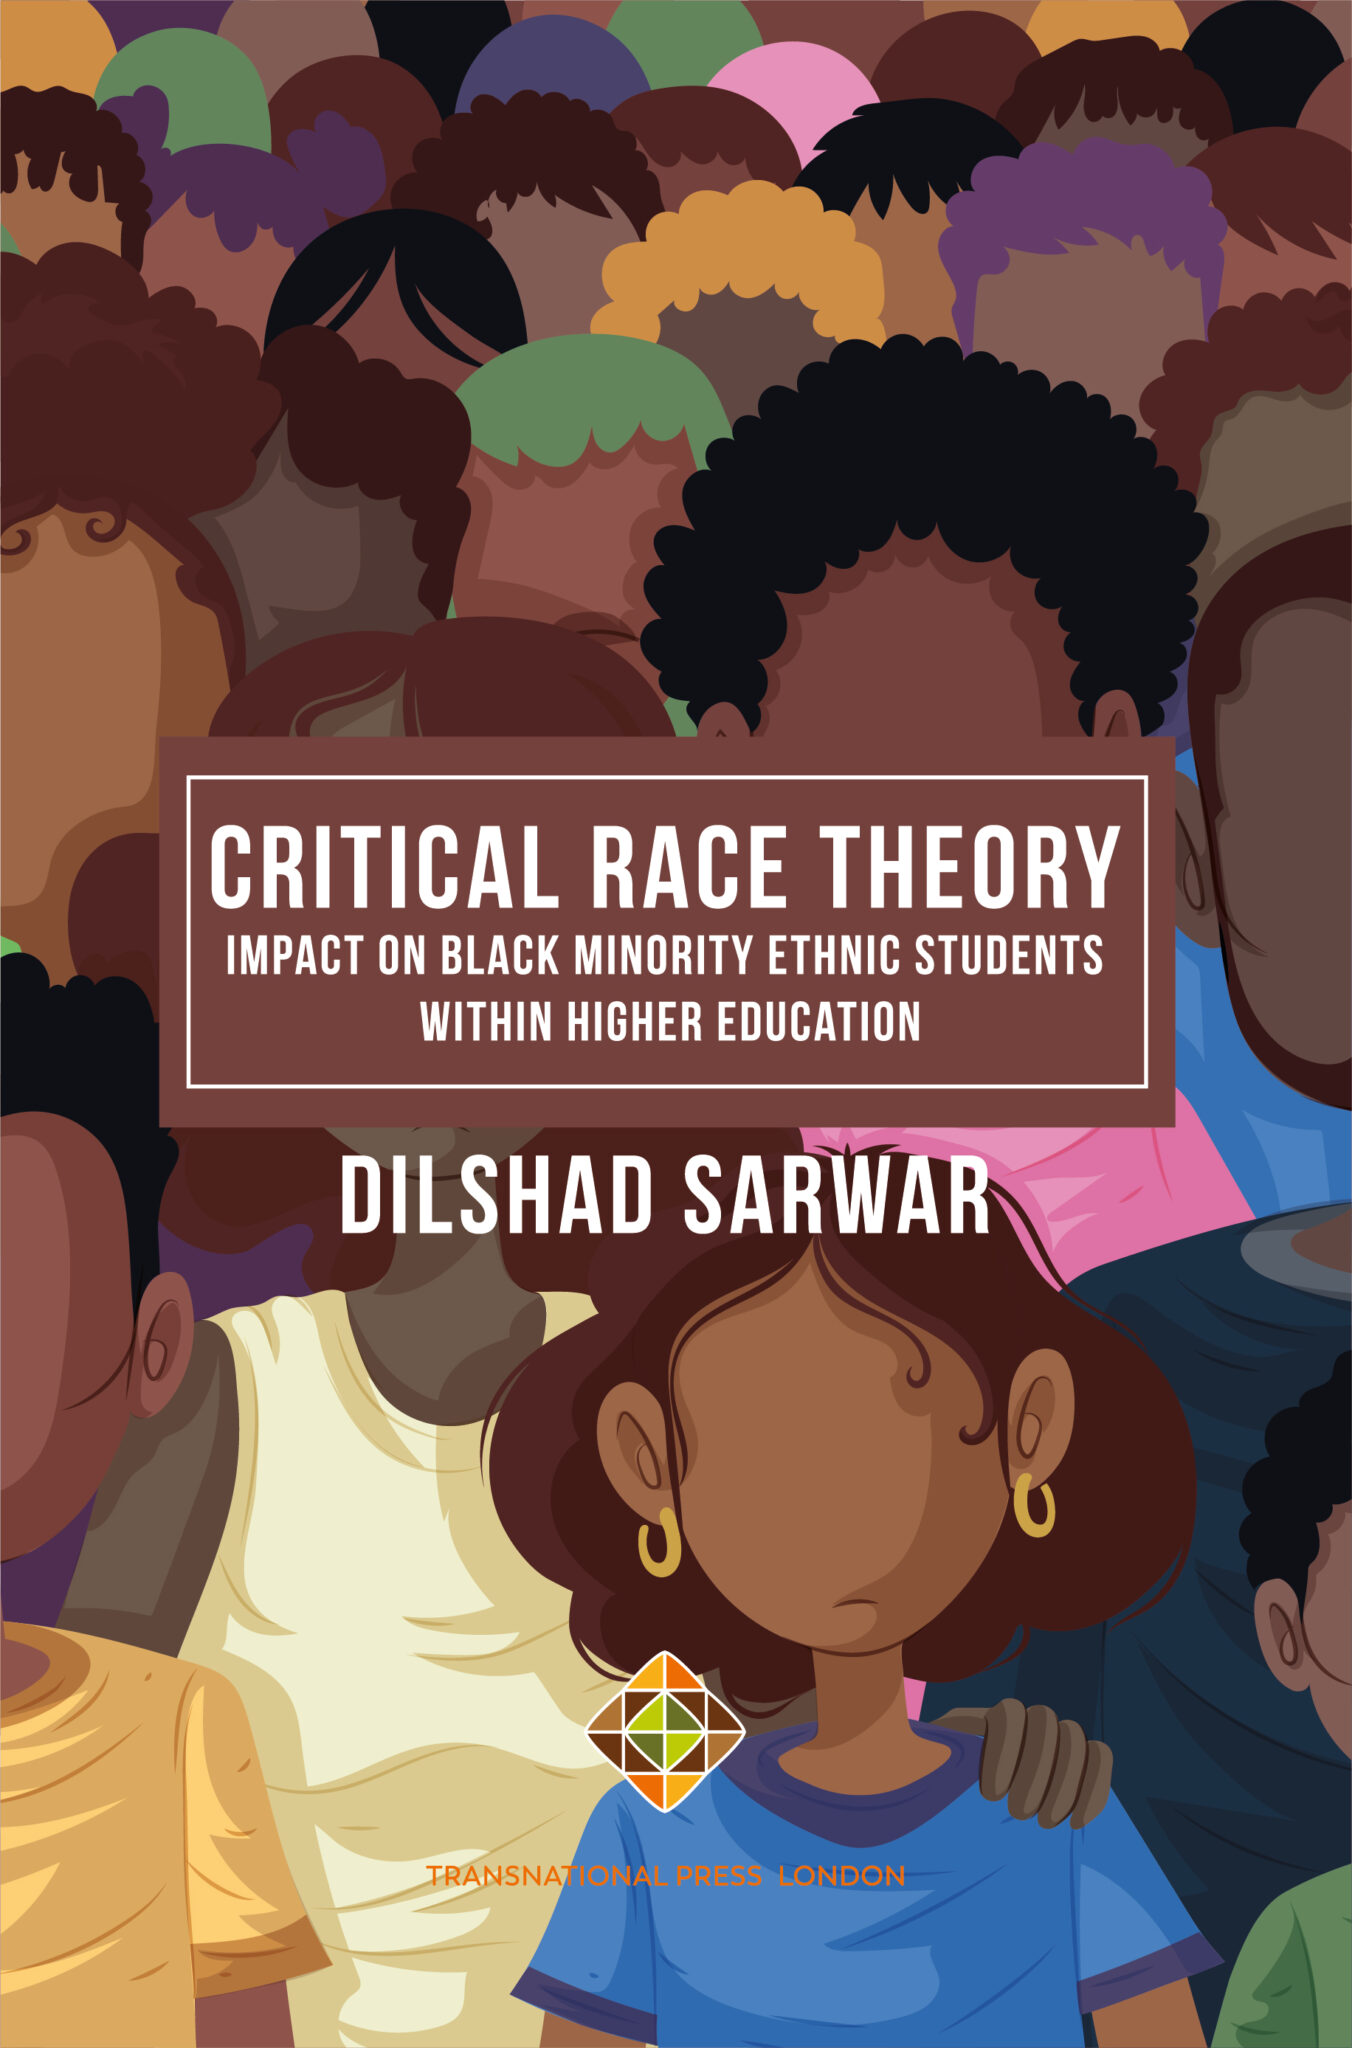 research on critical race theory